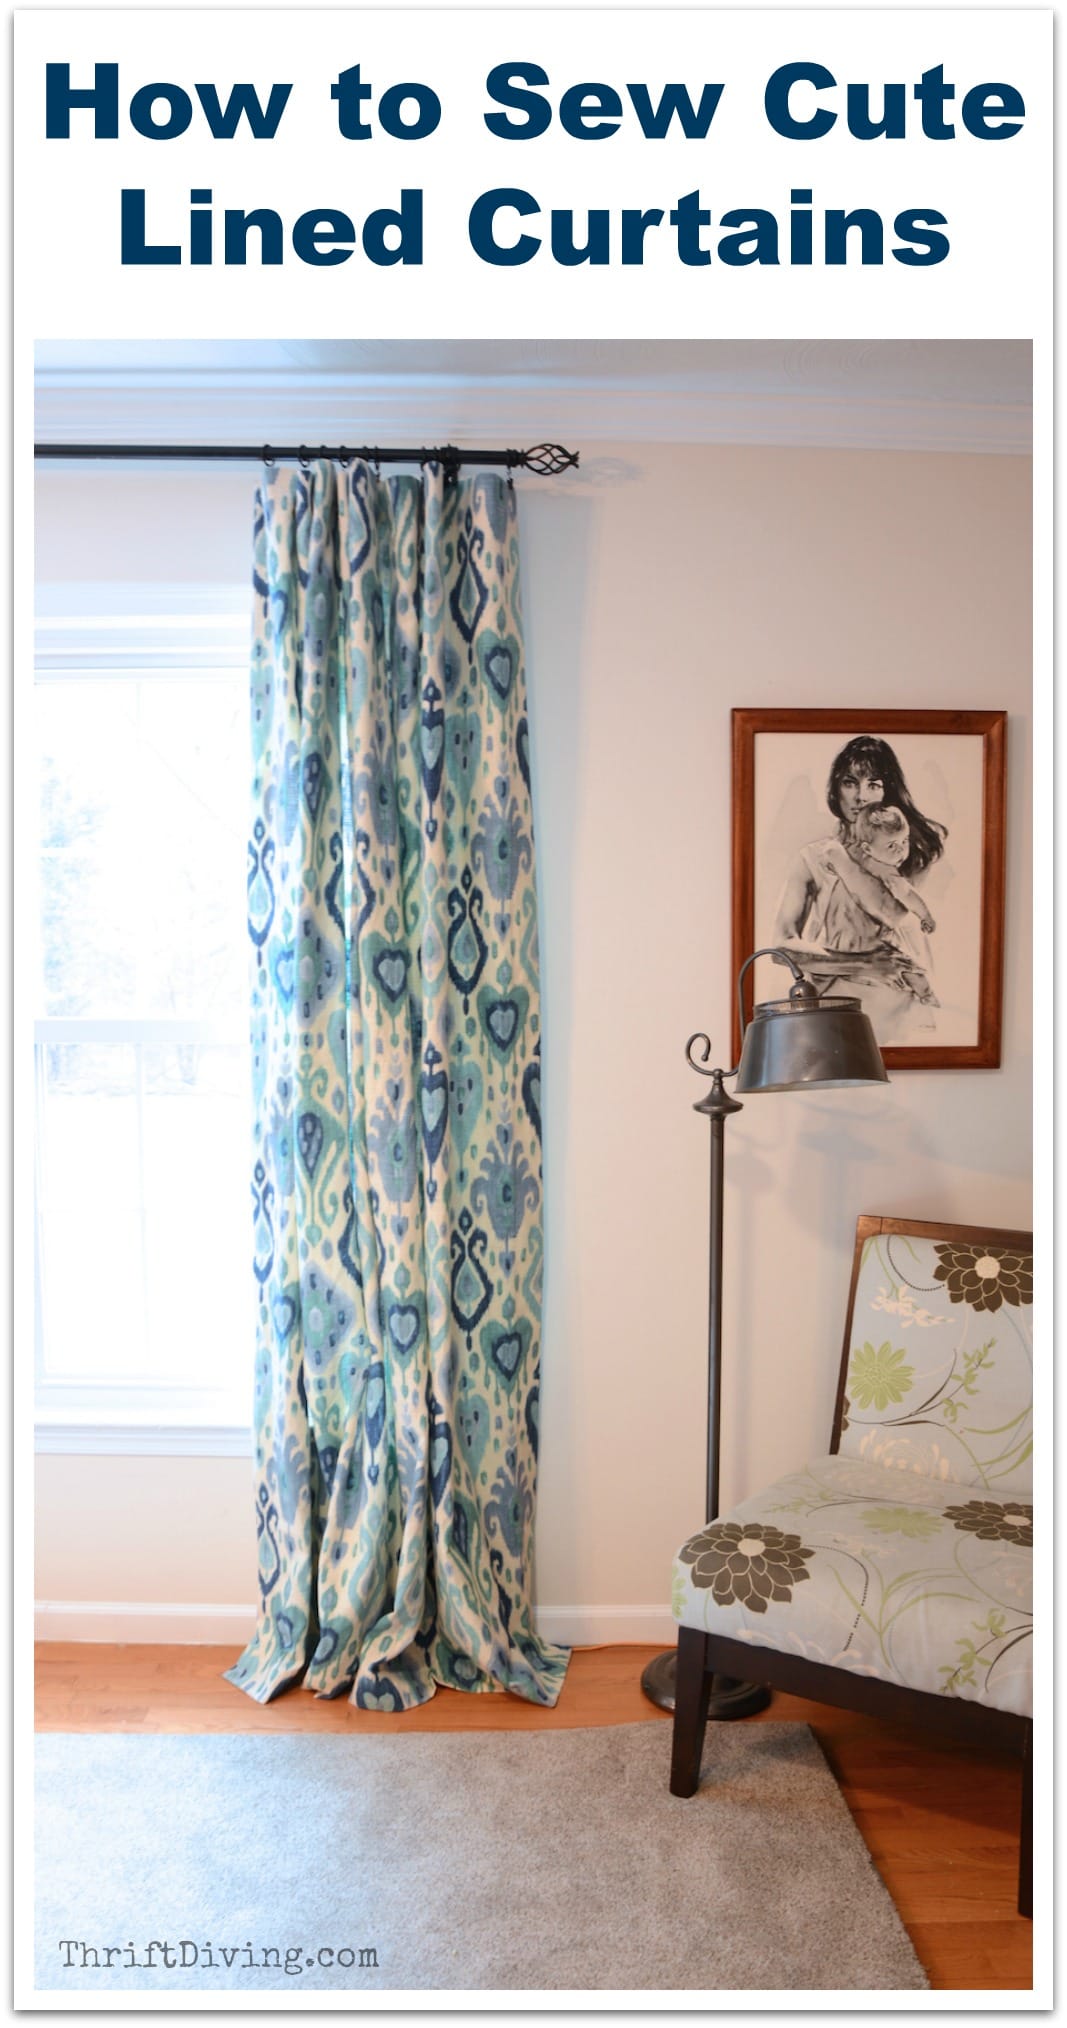 How To Sew Cute Lined Diy Curtains, How To Make Your Own Curtains Without Sewing